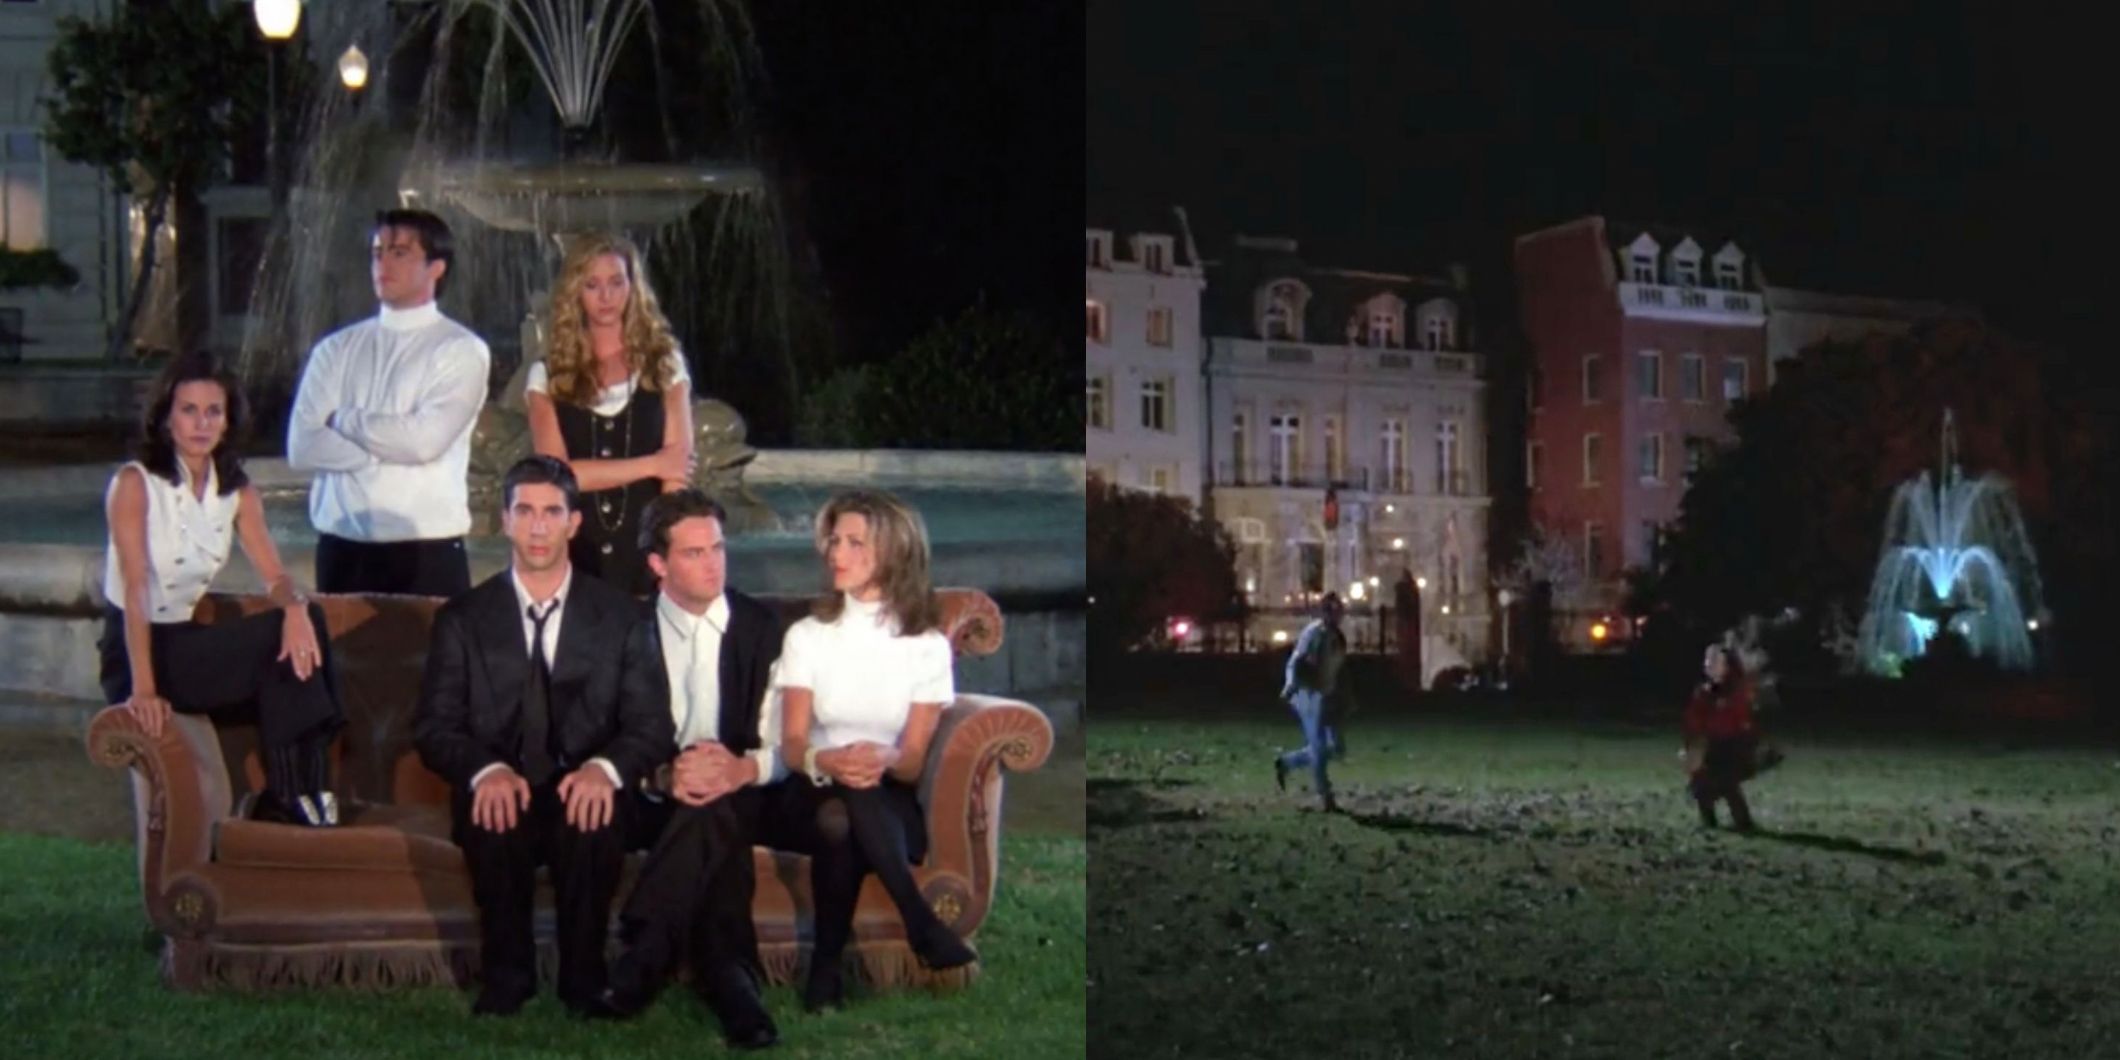 A split image features the Friends cast in front of a fountain and the Hocus Pocus characters in front of the same fountain